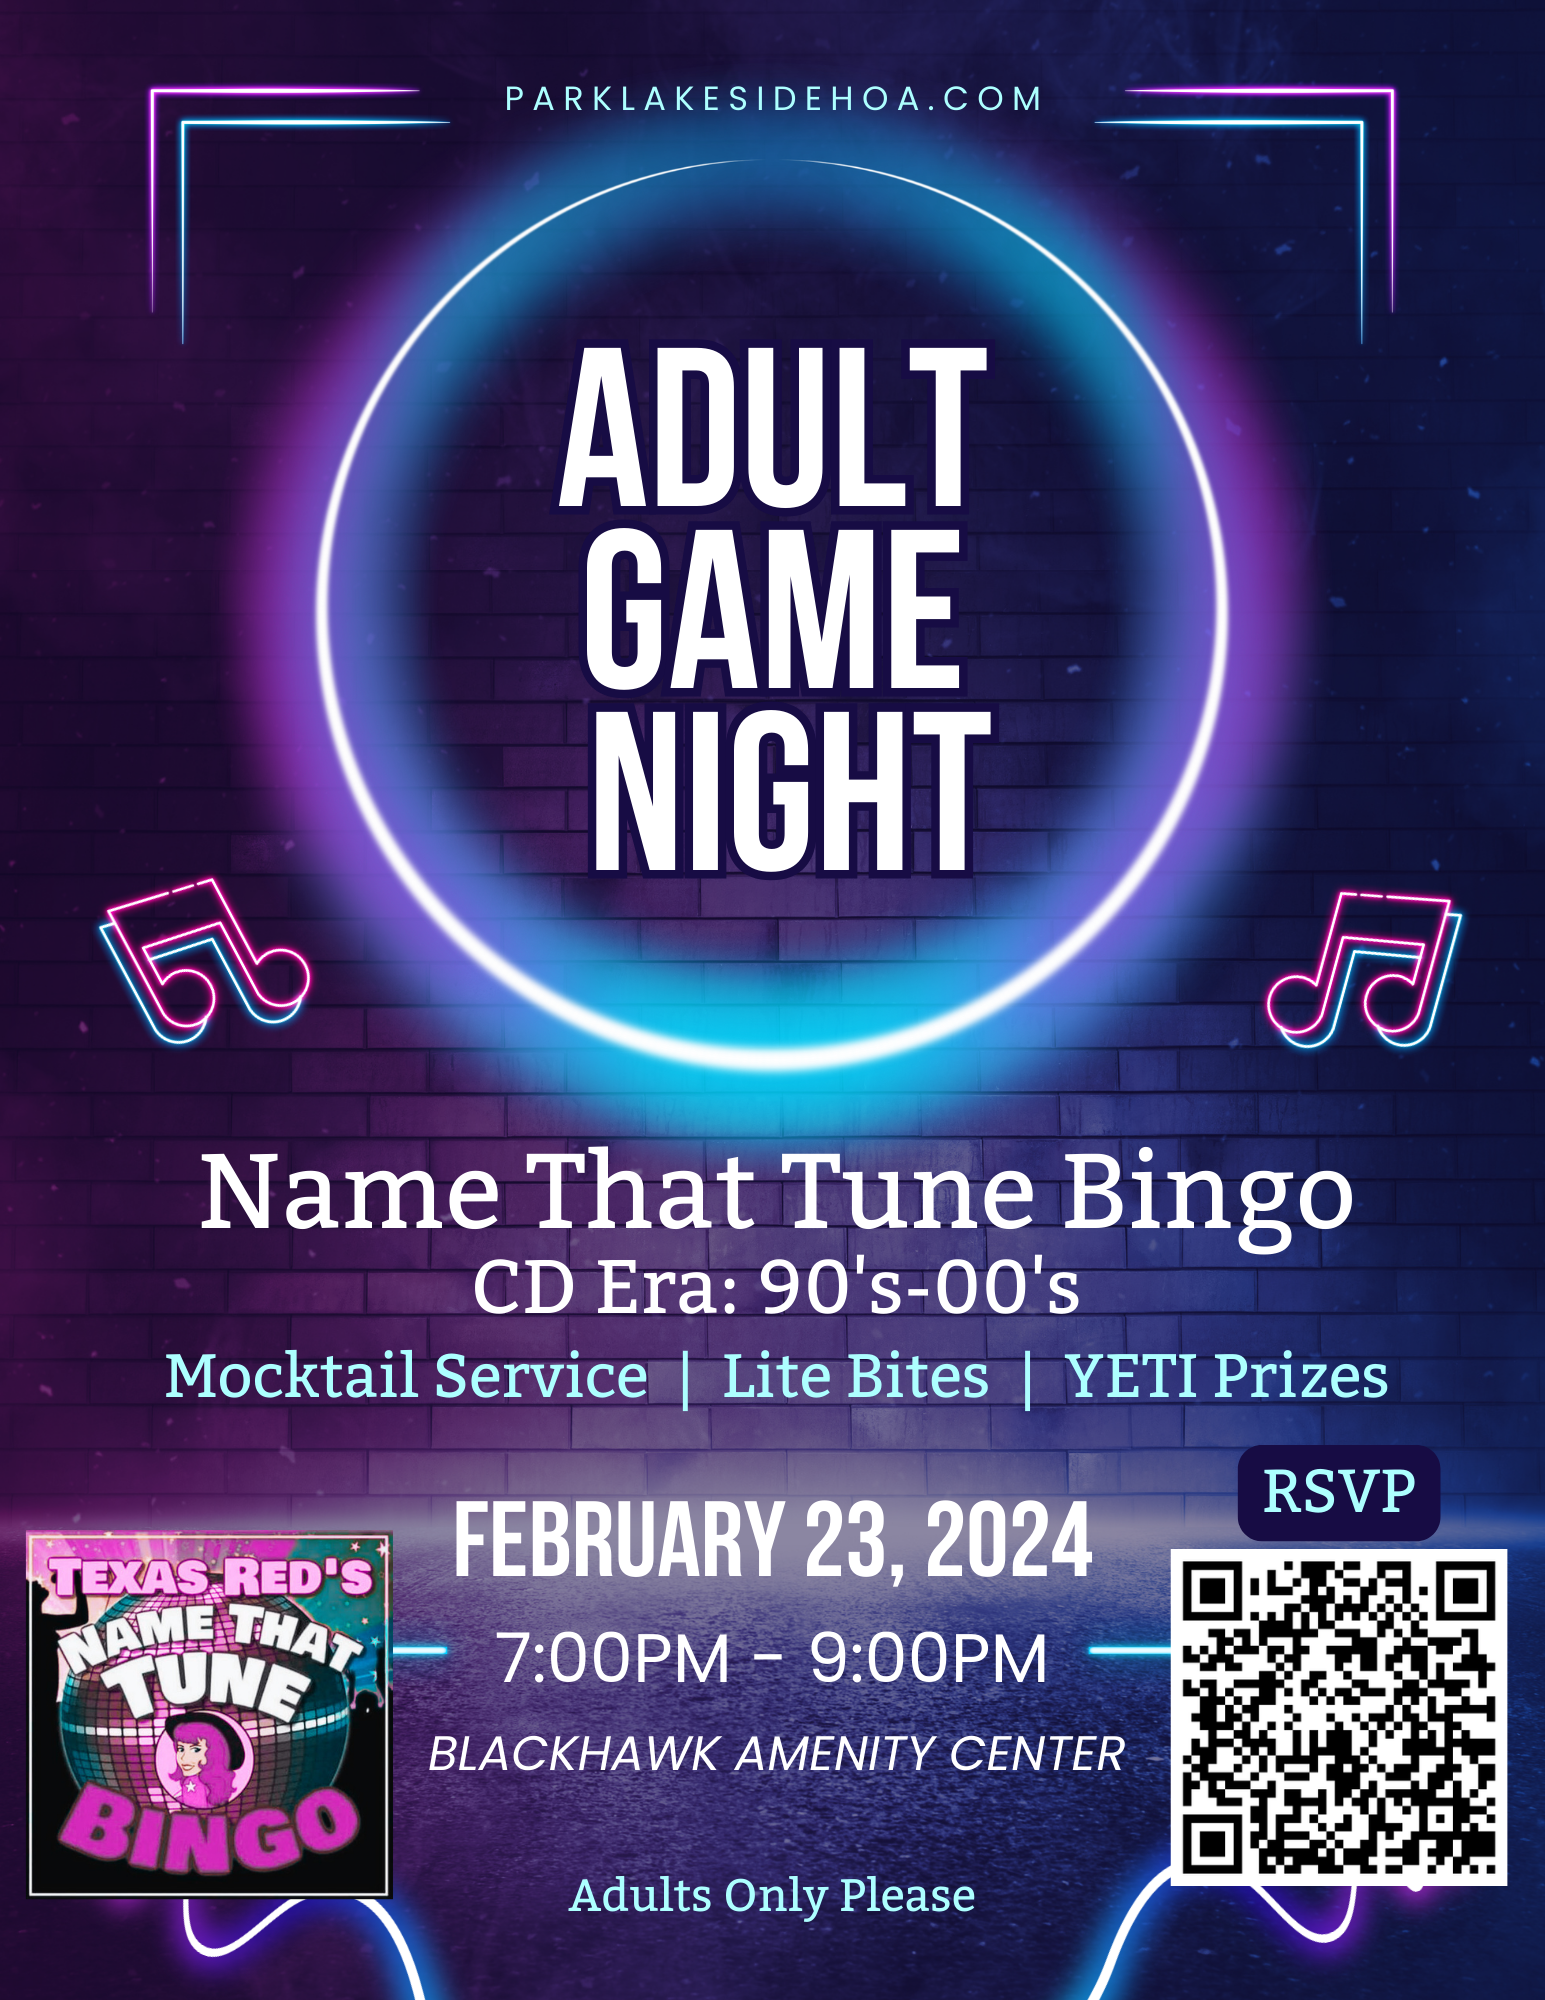 Flyer for an Adult Game Night event featuring 'Name That Tune Bingo' with a CD era theme of the 90s and 00s. The event is scheduled for February 23, 2024, from 7:00 PM to 9:00 PM at the Blackhawk Amenity Center. It includes mocktail service, light bites, and YETI prizes. The background has a vibrant neon aesthetic with music notes, and there is a QR code for RSVP on the right side. Text at the bottom states 'Adults Only Please'. The website parklakesidehoa.com is displayed at the top.